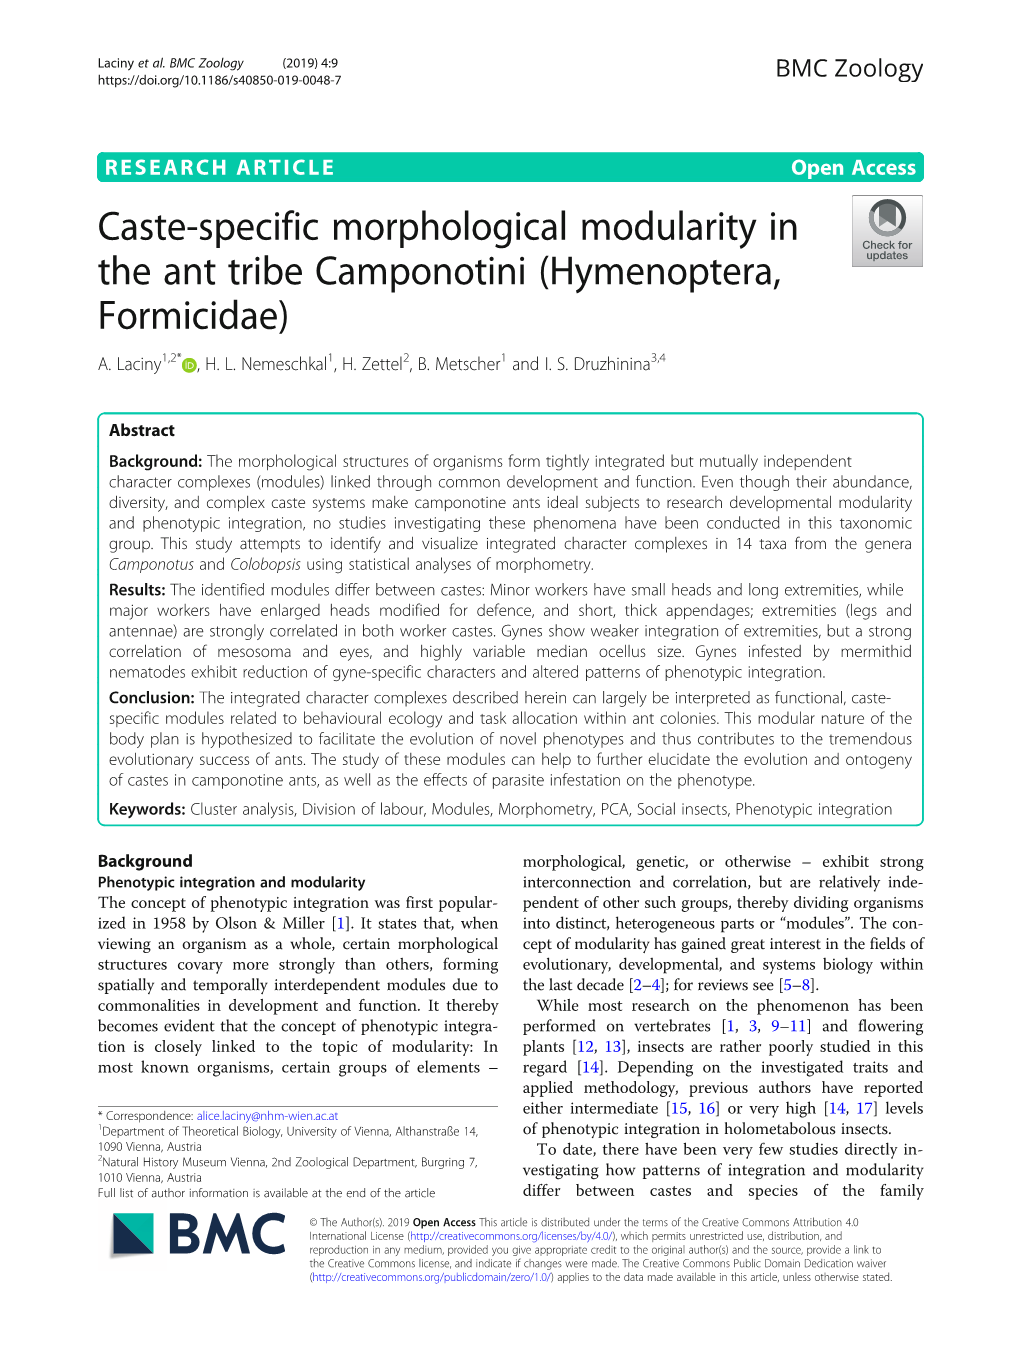 Caste-Specific Morphological Modularity in the Ant Tribe Camponotini (Hymenoptera, Formicidae) A